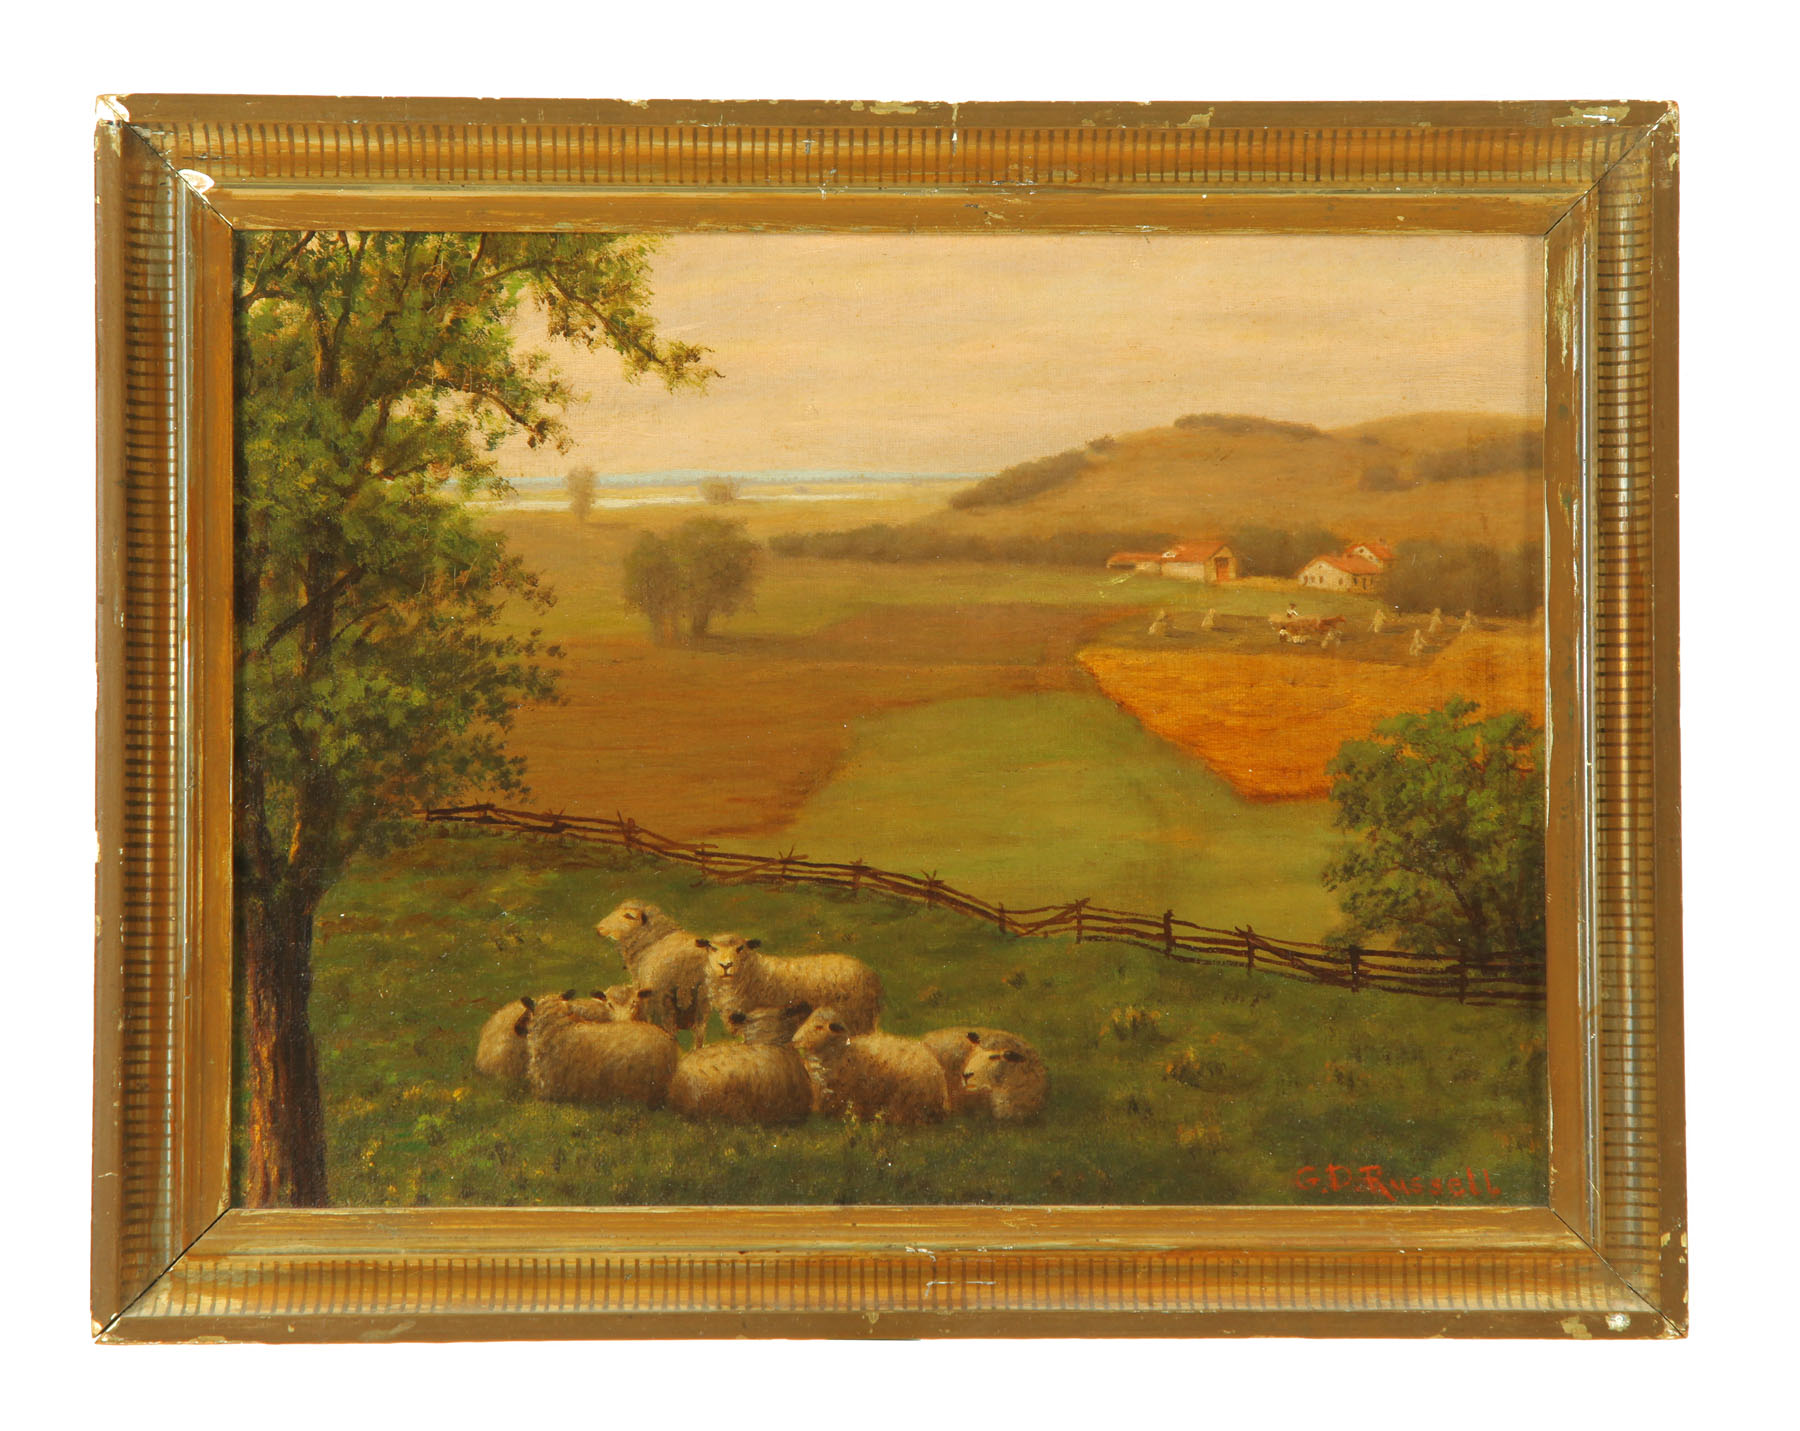 LANDSCAPE WITH SHEEP SIGNED G.D.